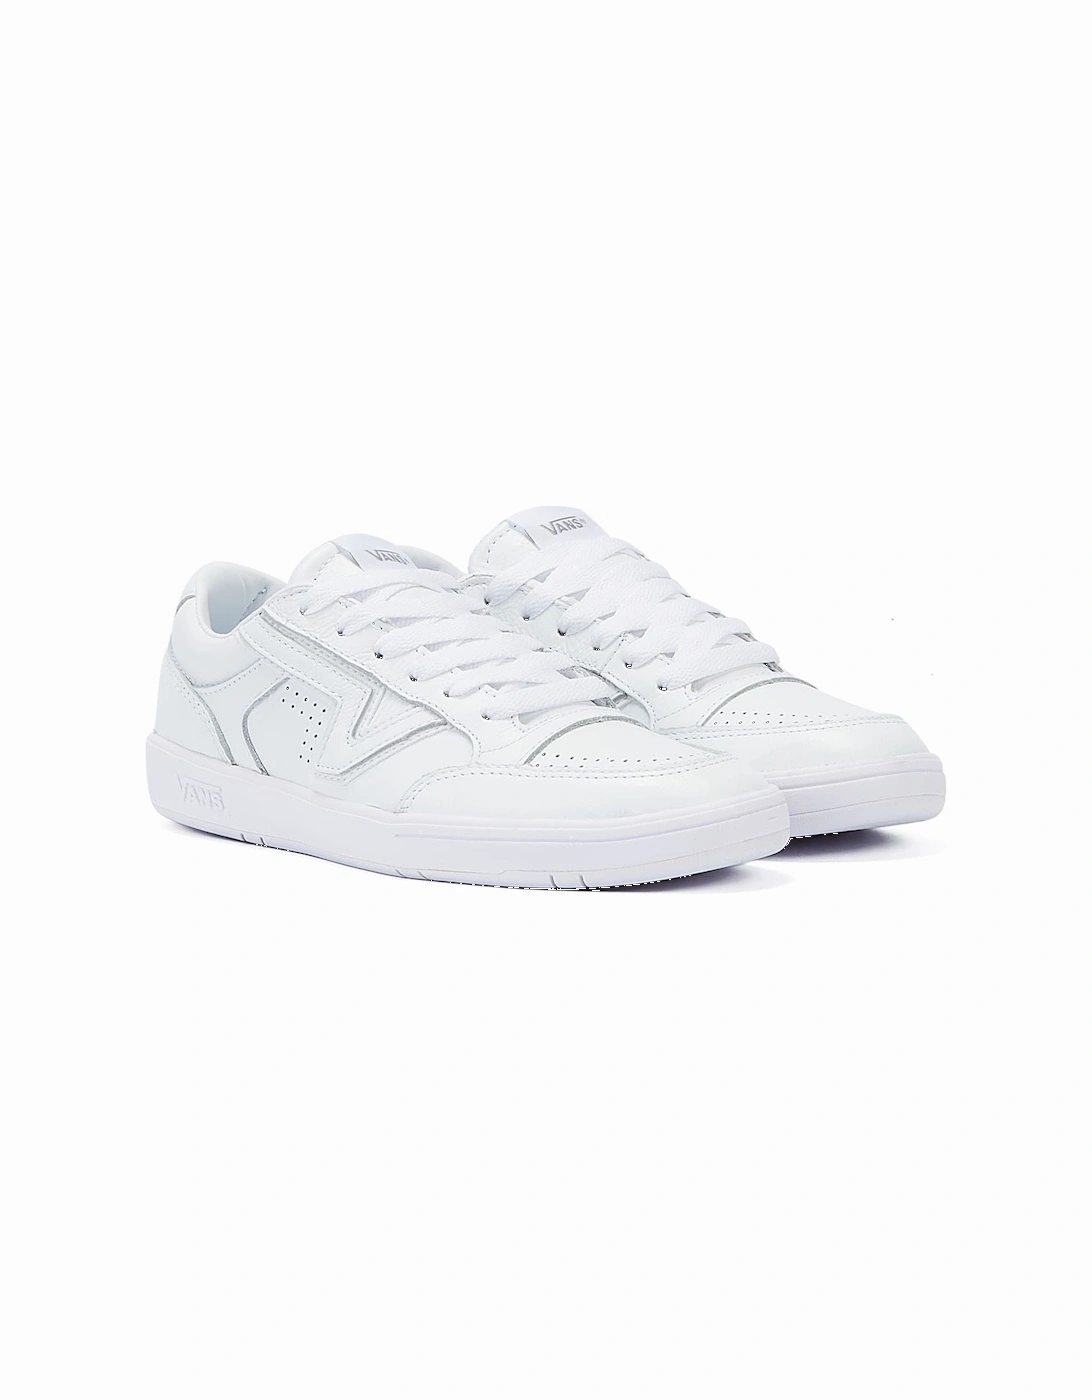 Lowland Comfycush True White Trainers, 9 of 8